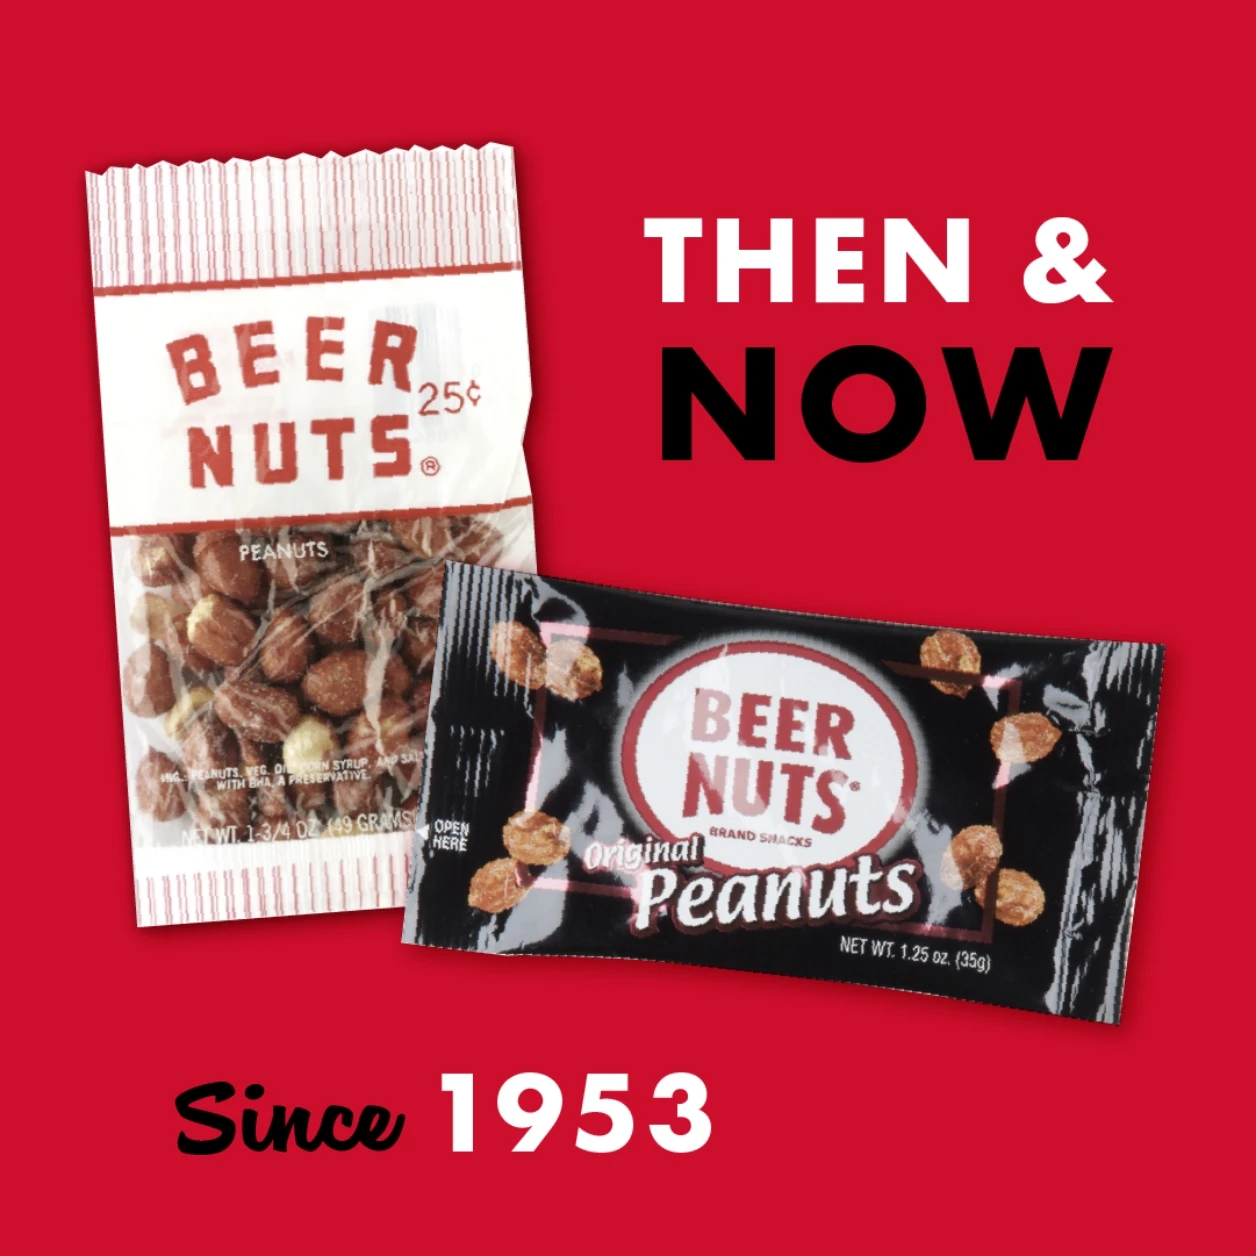 Beer Nuts since 1953.